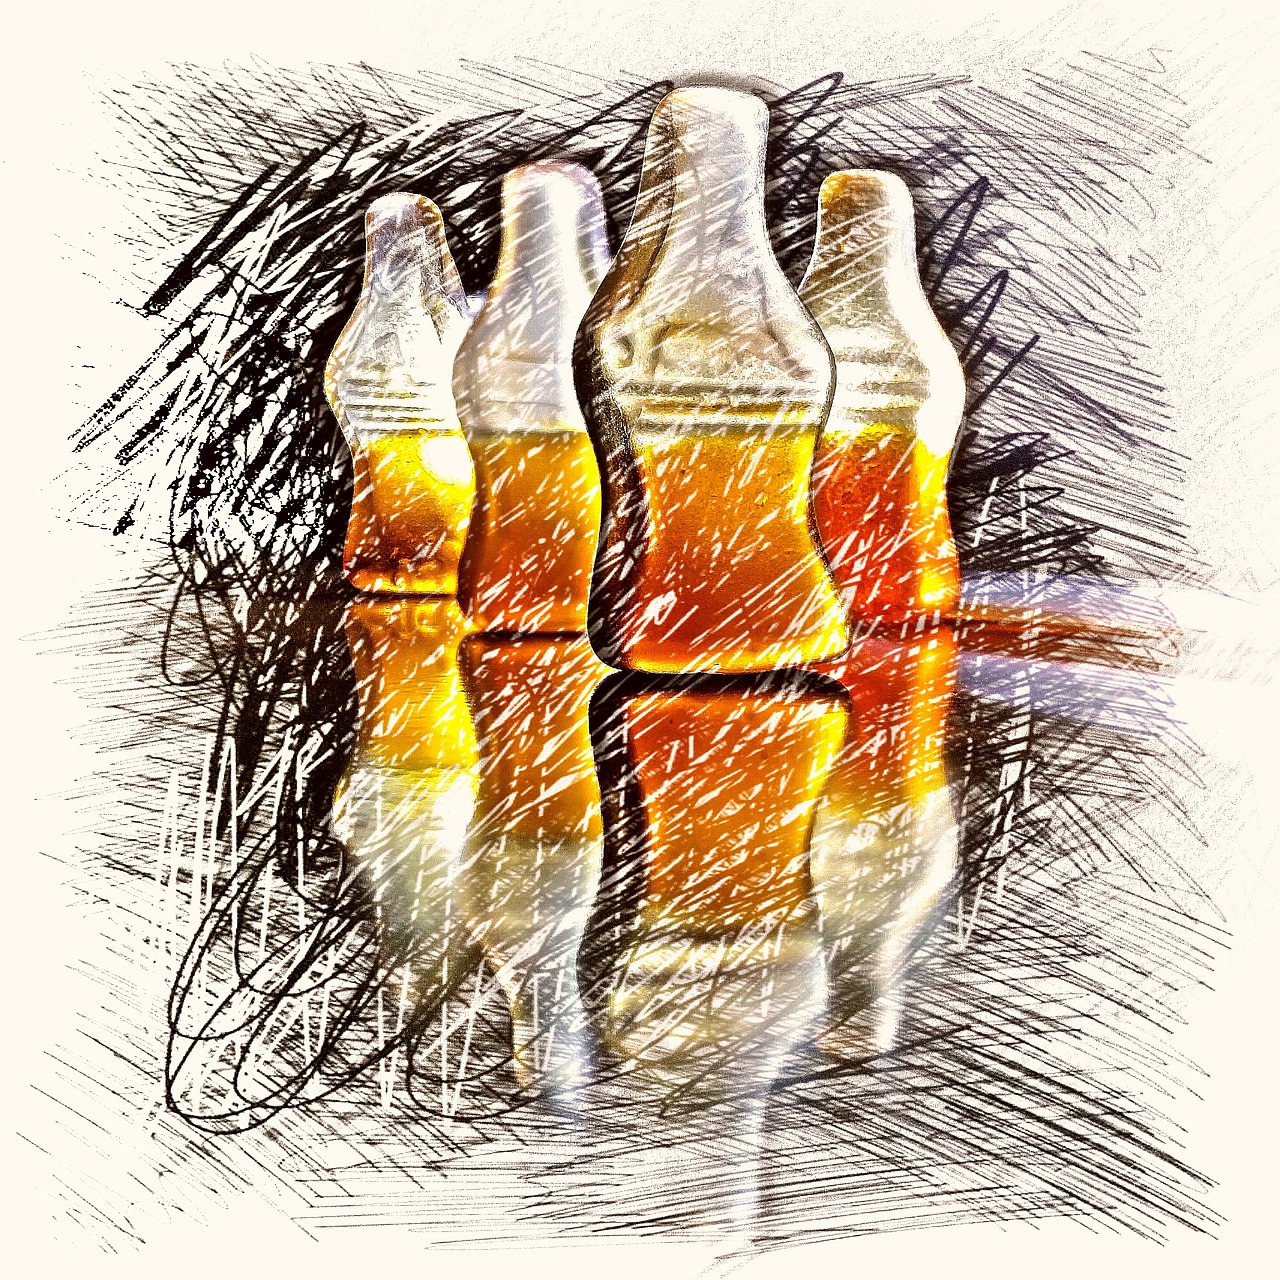 Image - cola bottles fruit jelly drawing